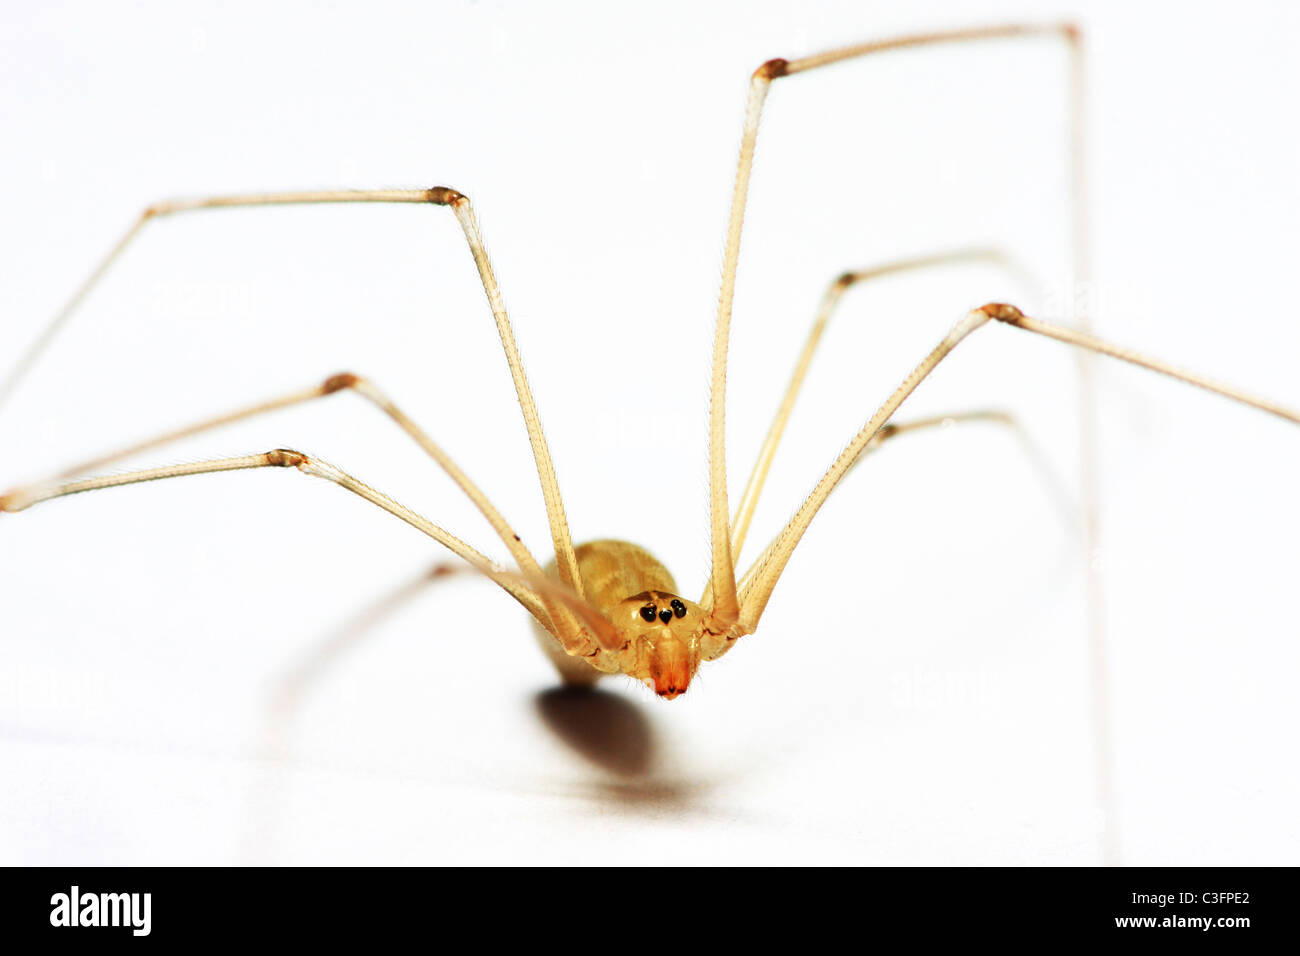 Daddy Long Legs Spider, Pholcus phalangioides on white background Stock Photo